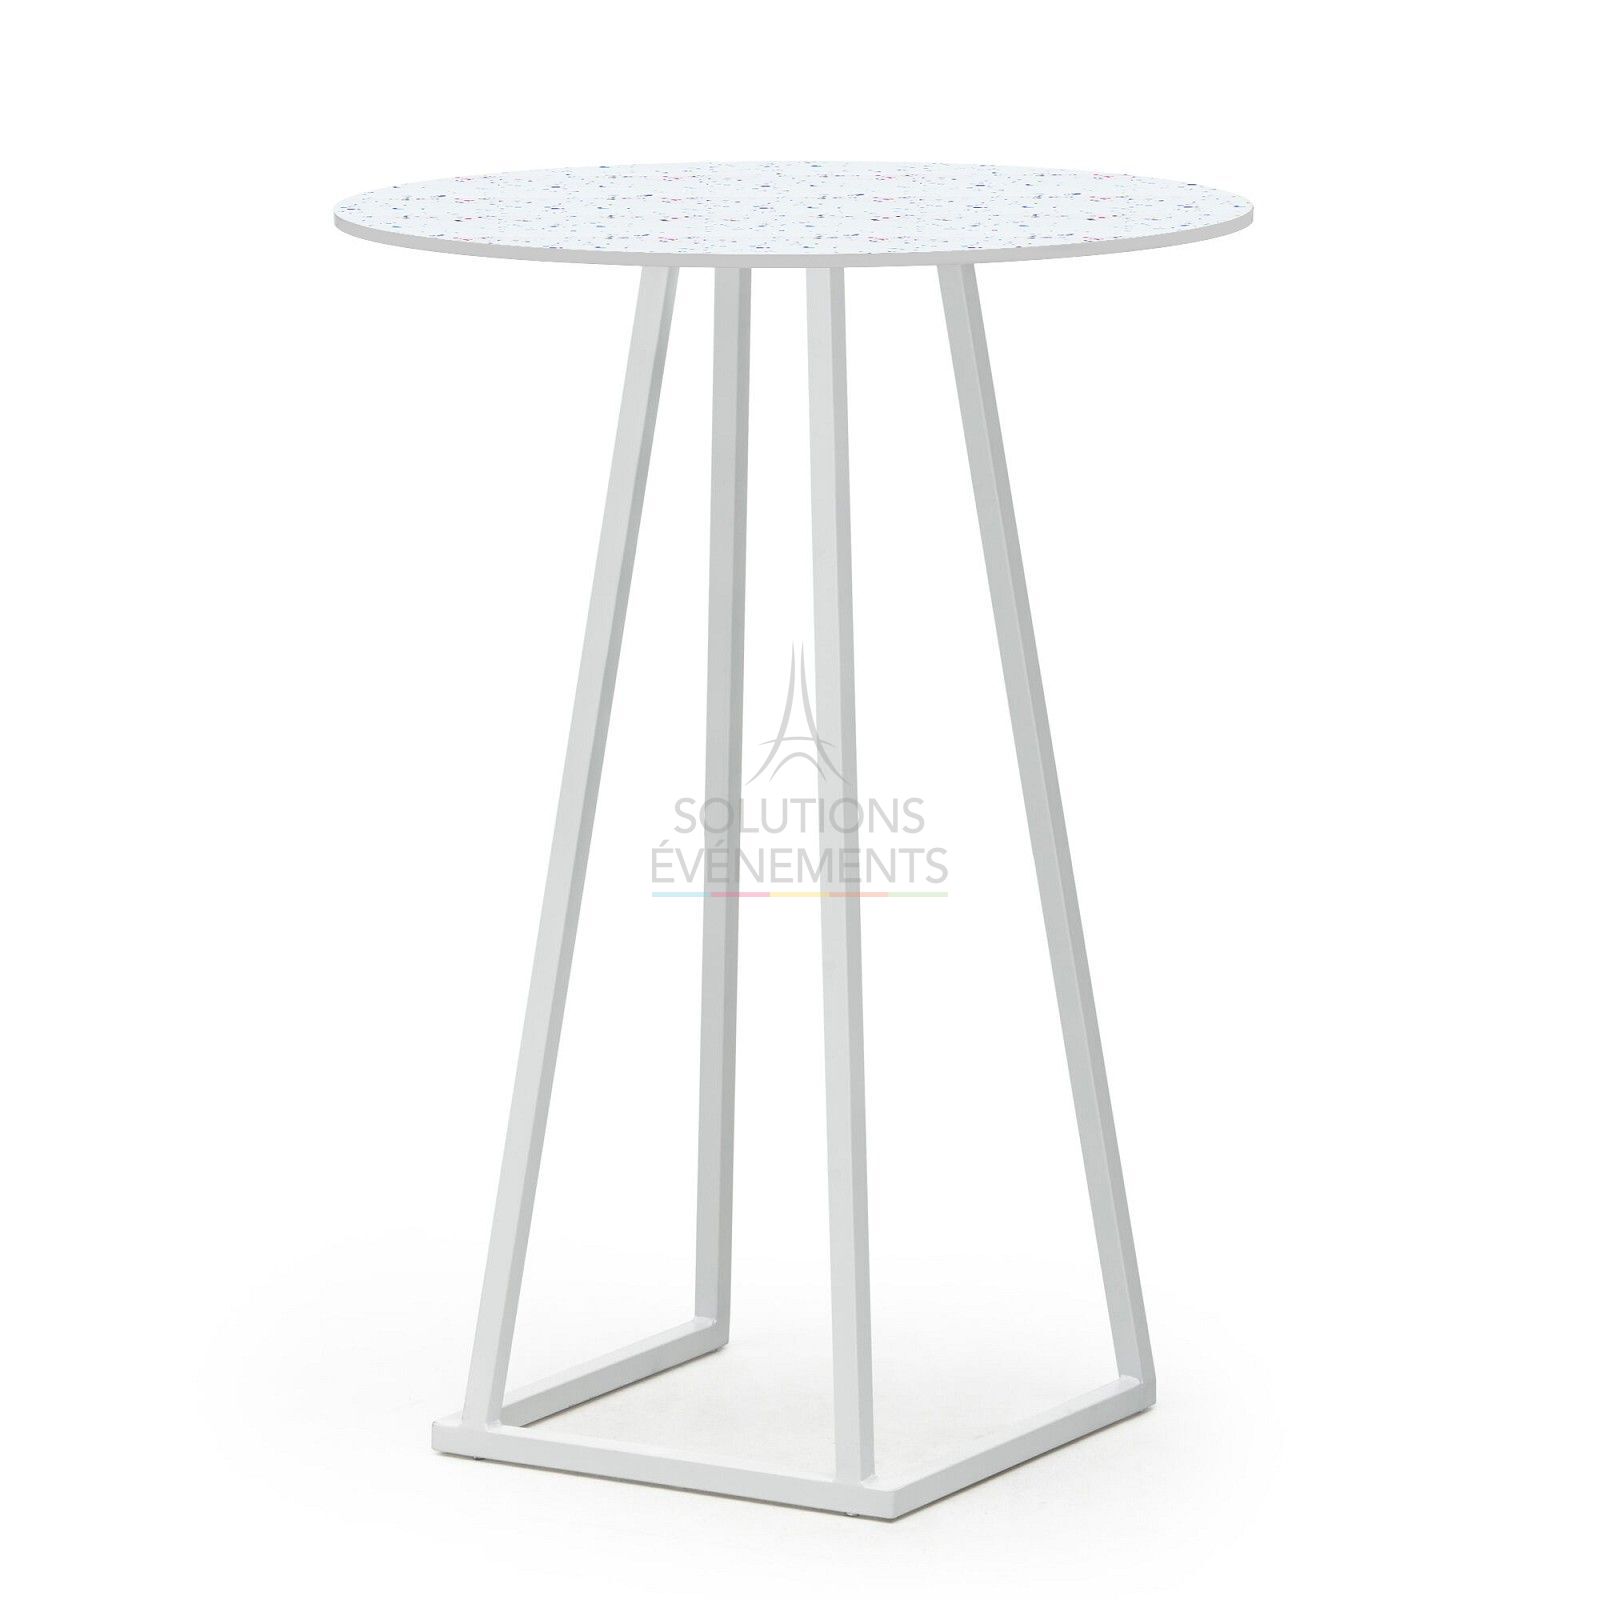 Rental of eco-responsible standing tables with round top